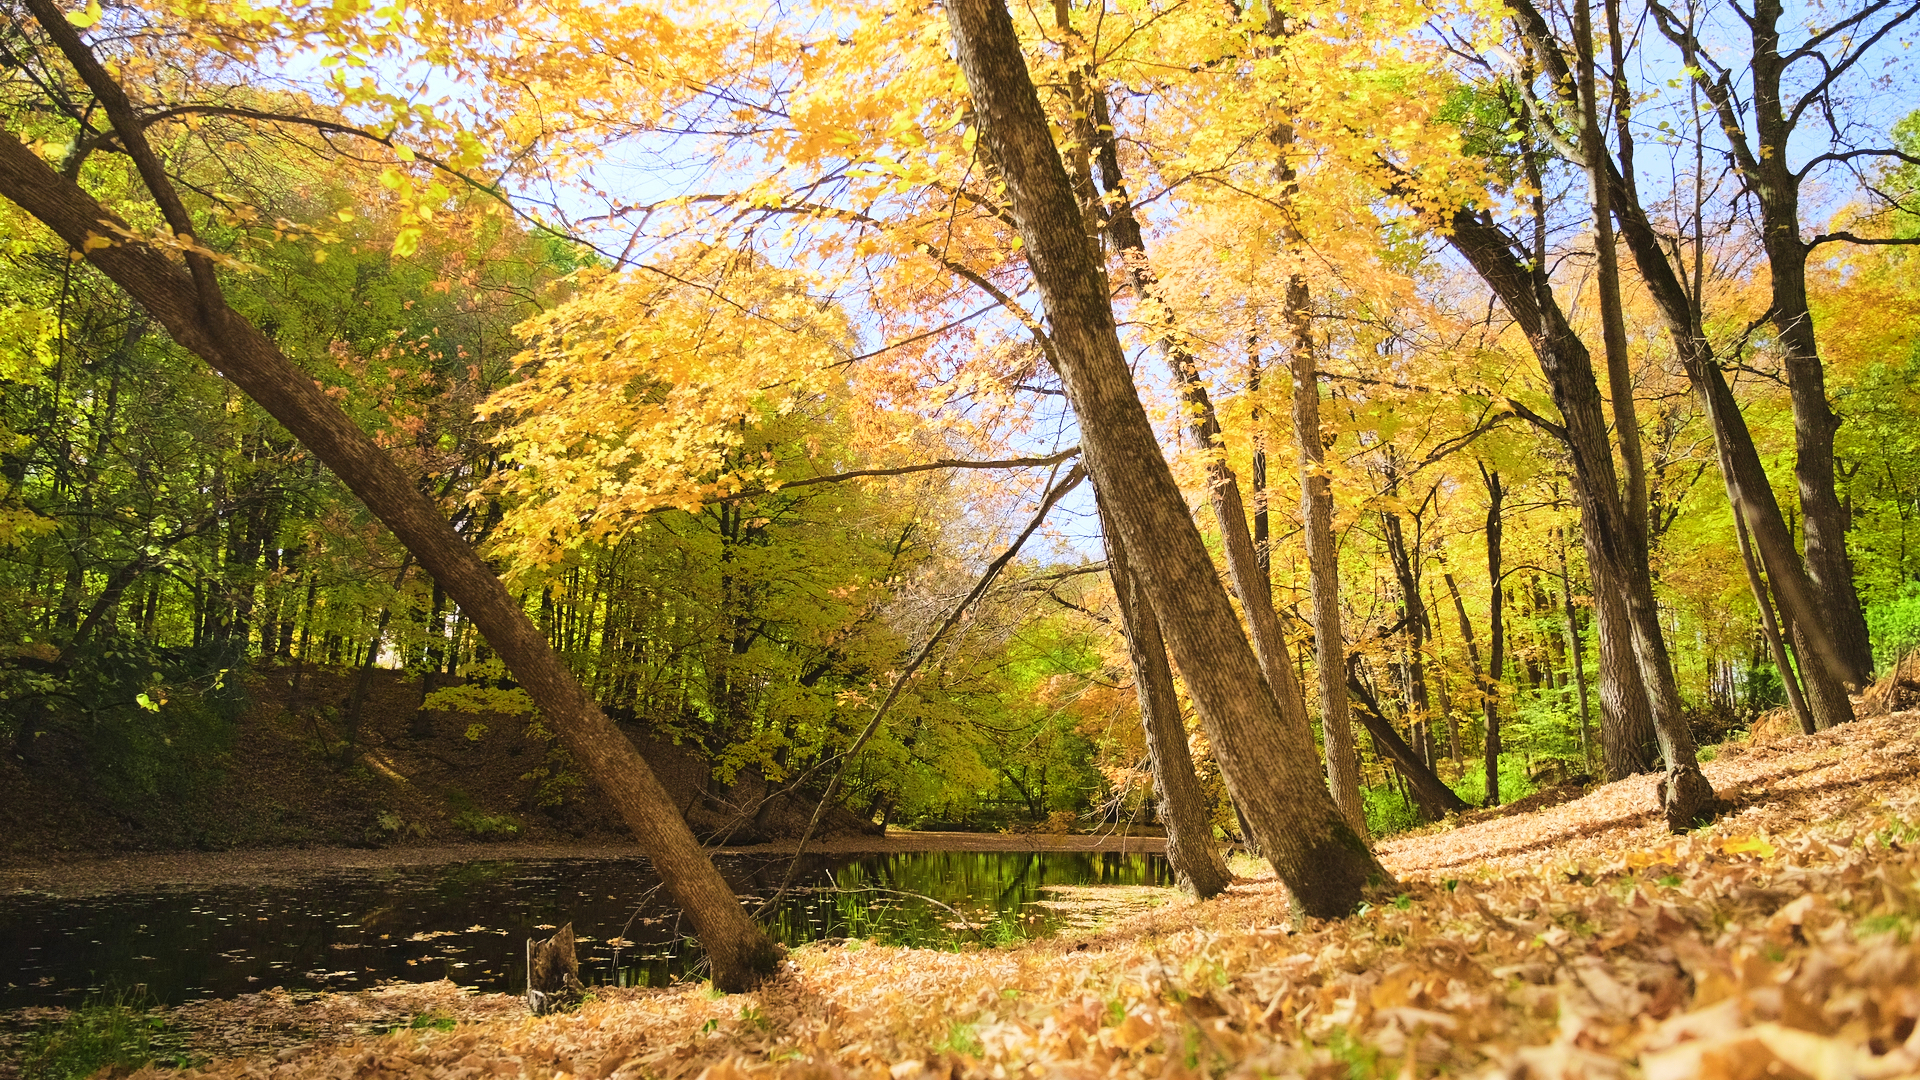 A scenic fall scene of trees with golden leaves along a Minnesota river